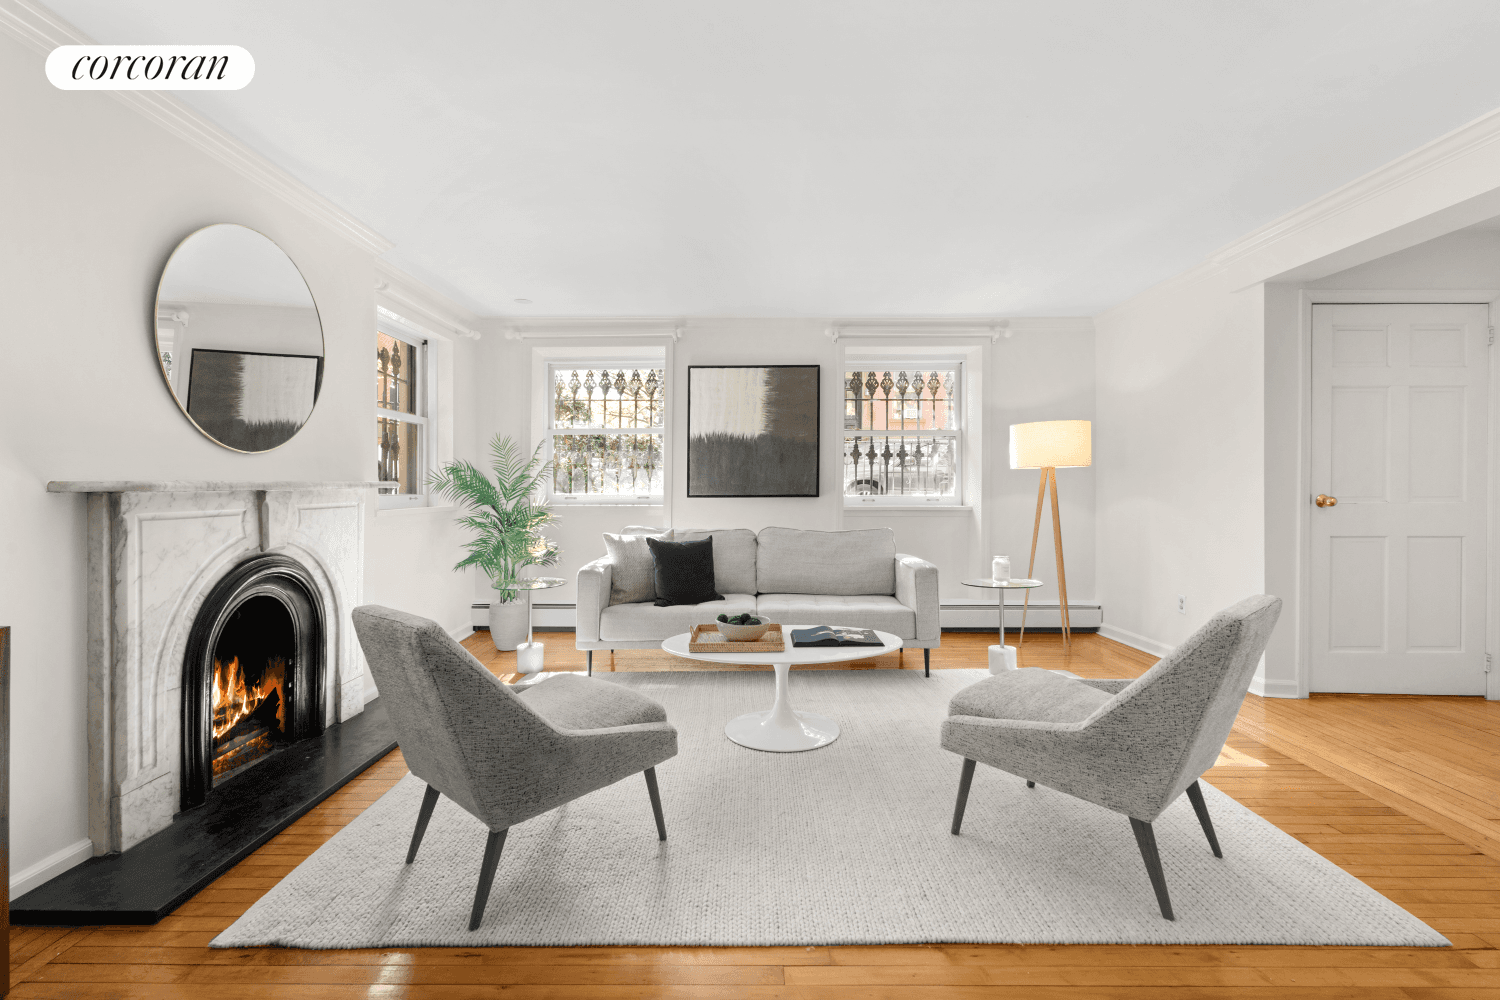 Apartment 1 at 222 Clinton Street is an incredibly rare offering a 1, 776sf duplex two bedroom, 2.